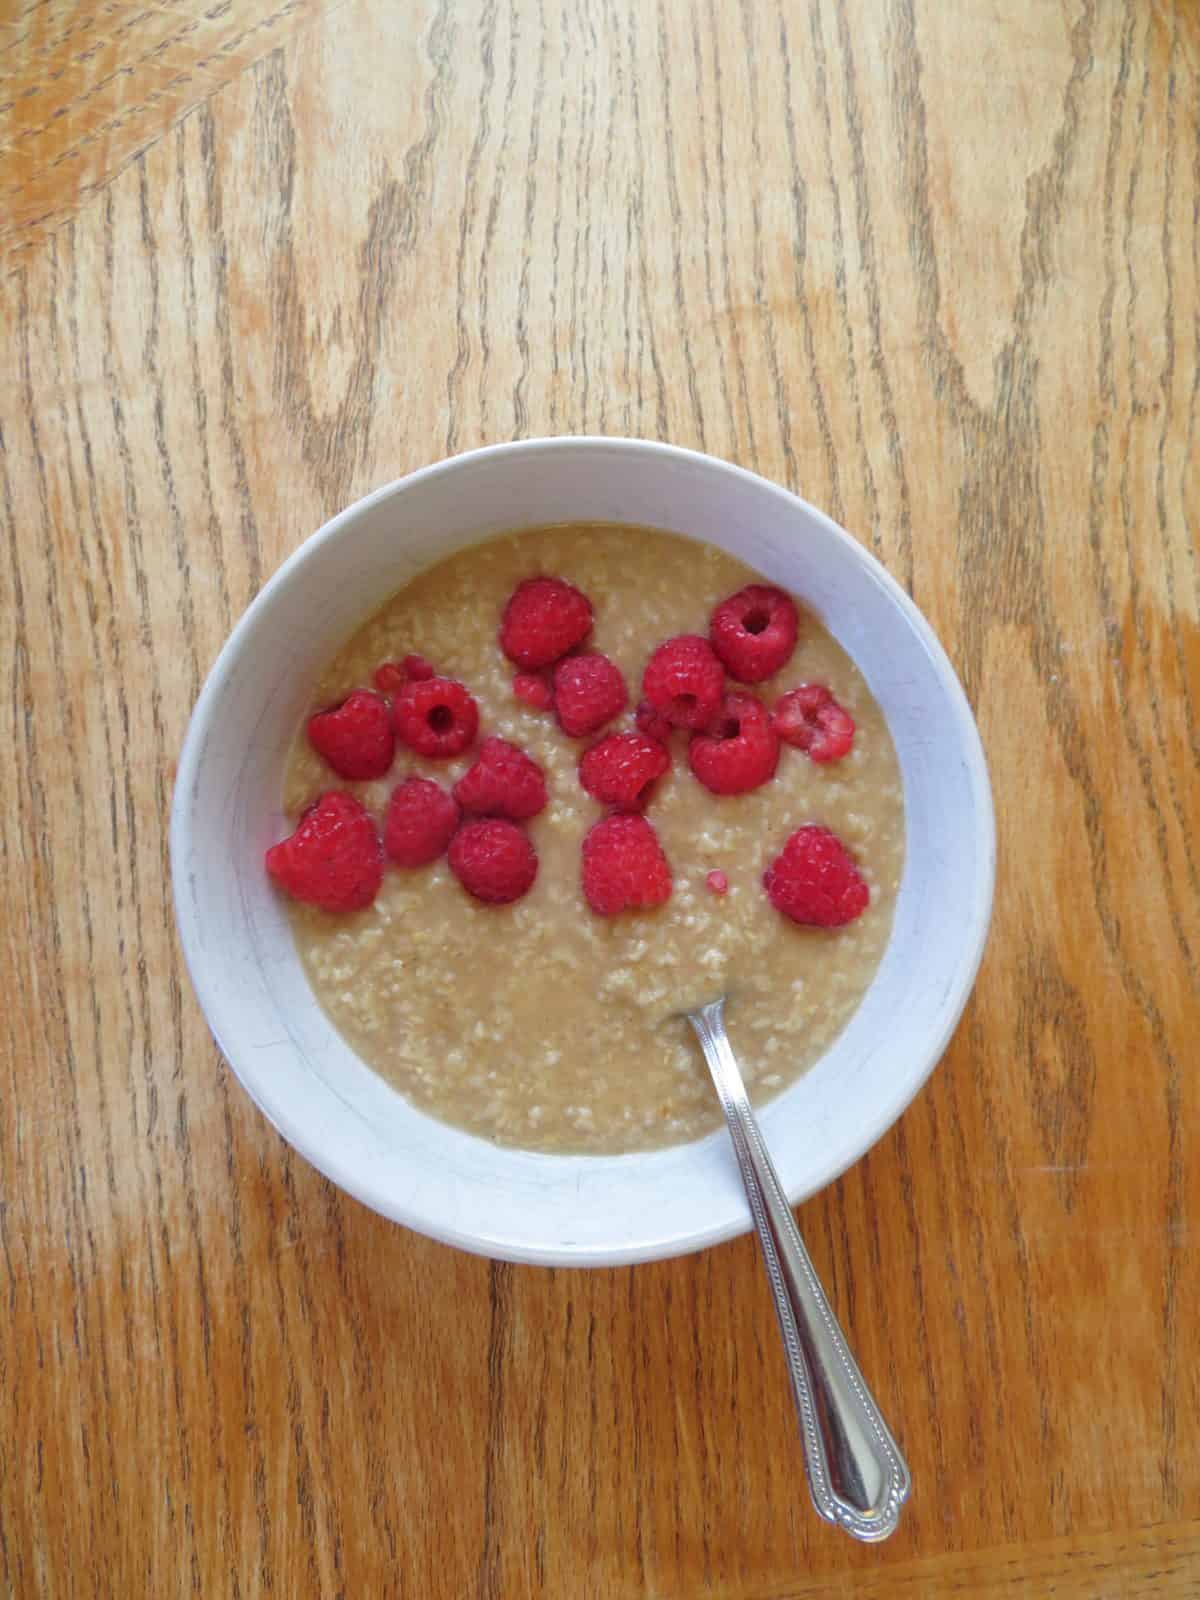 Nourishing oatmeal bowl with fresh raspberries.  - The Midwest Kitchen Blog